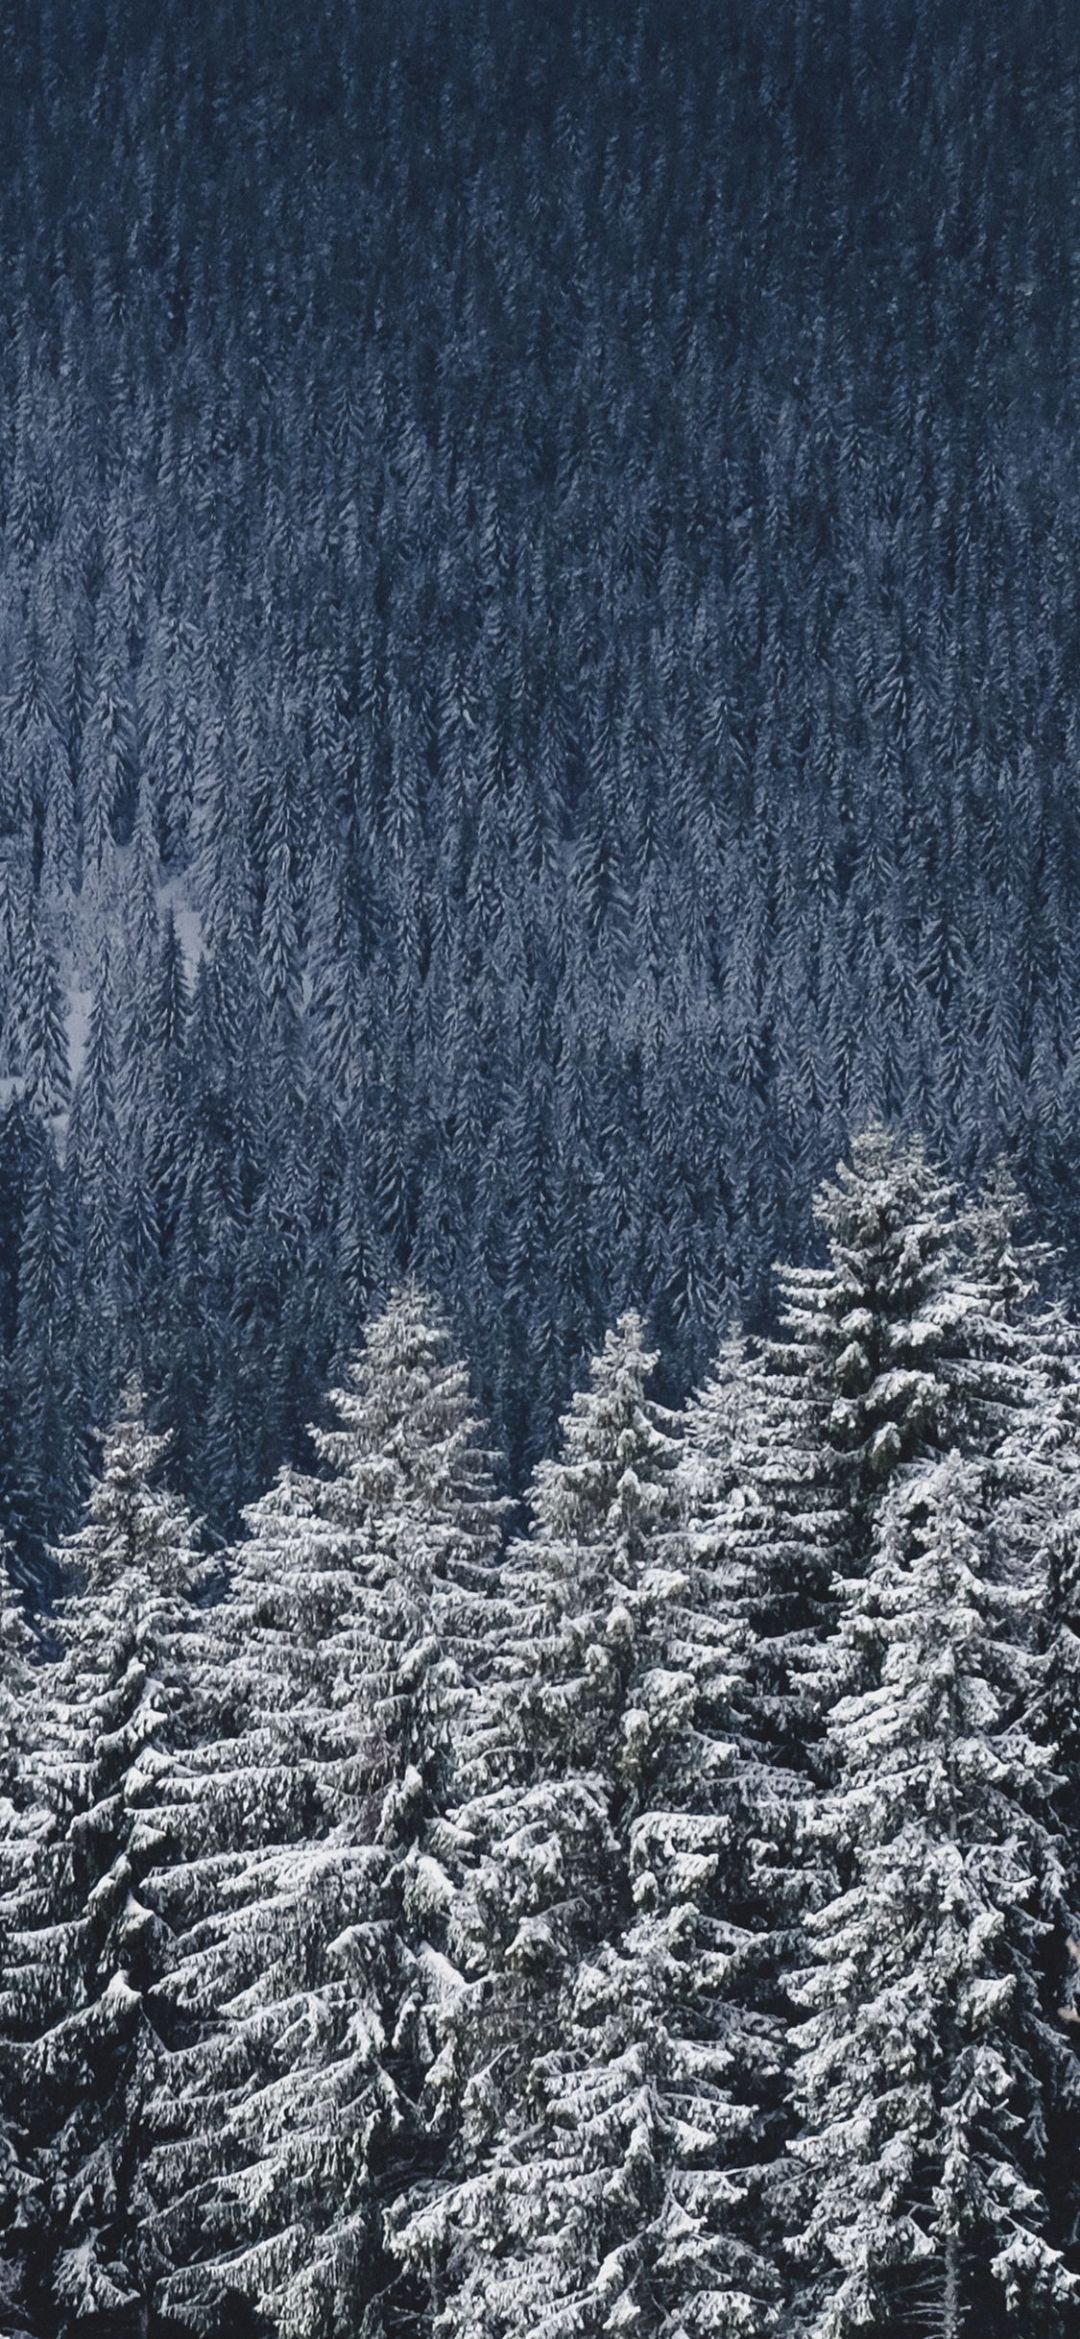 A snow covered forest of pine trees in the mountains. - Winter, snow